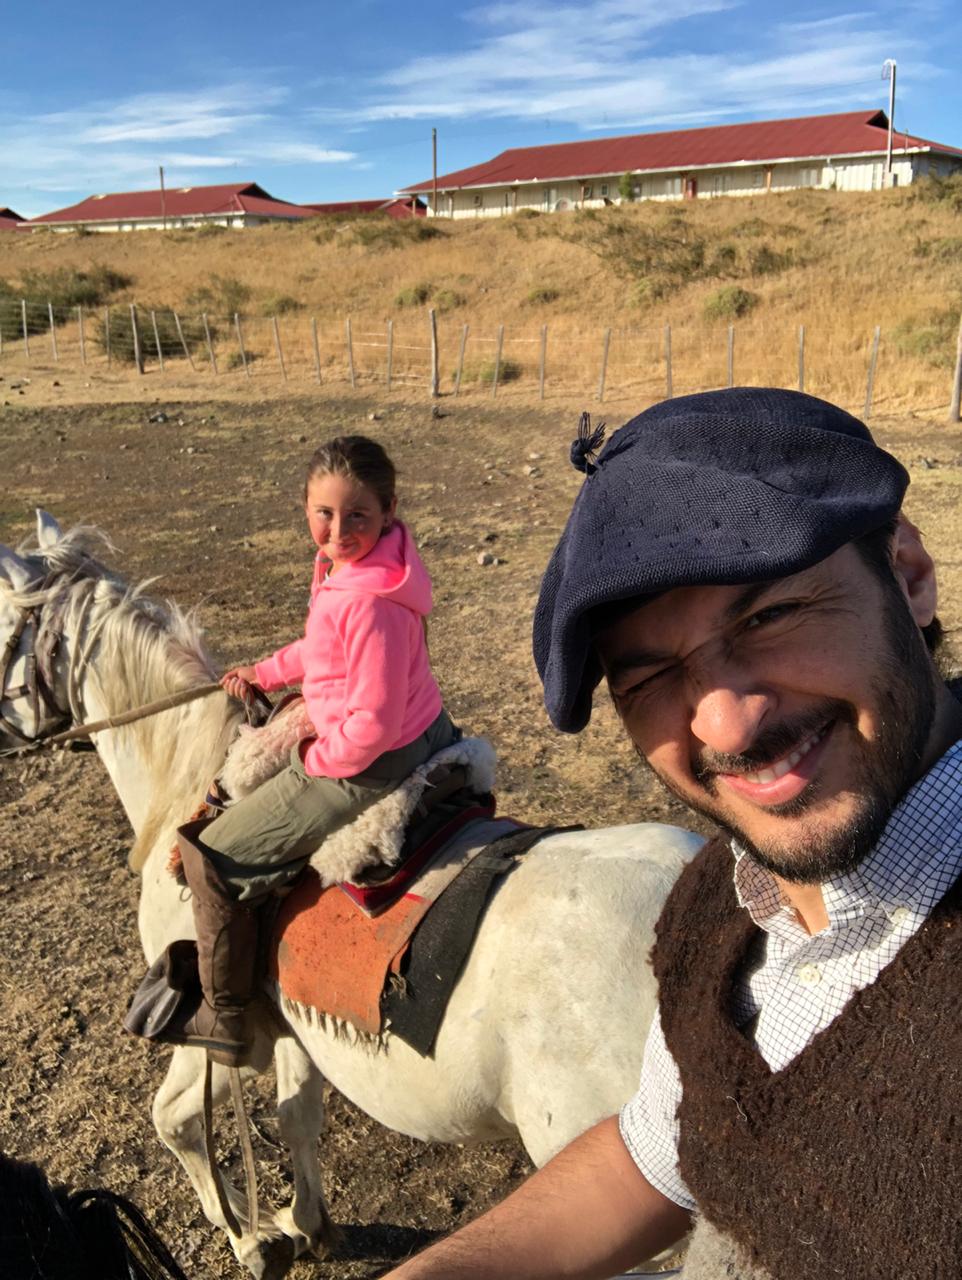 Family selfie while on a horseback riding excursion offered by Tierra Hotels.